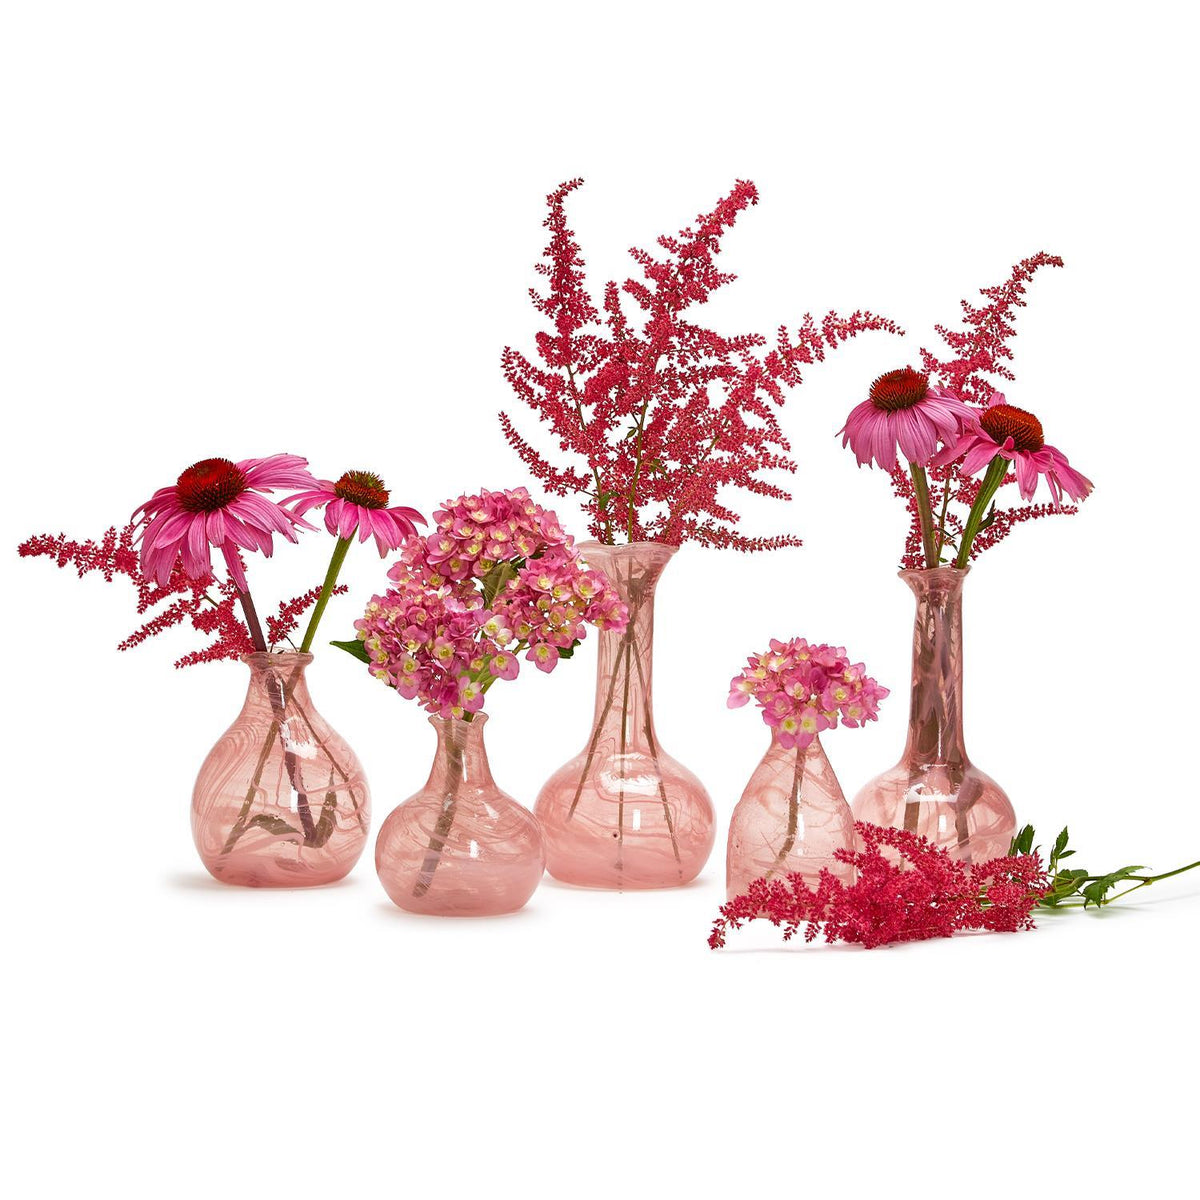 Pink Recycled Glass Handblown Vases